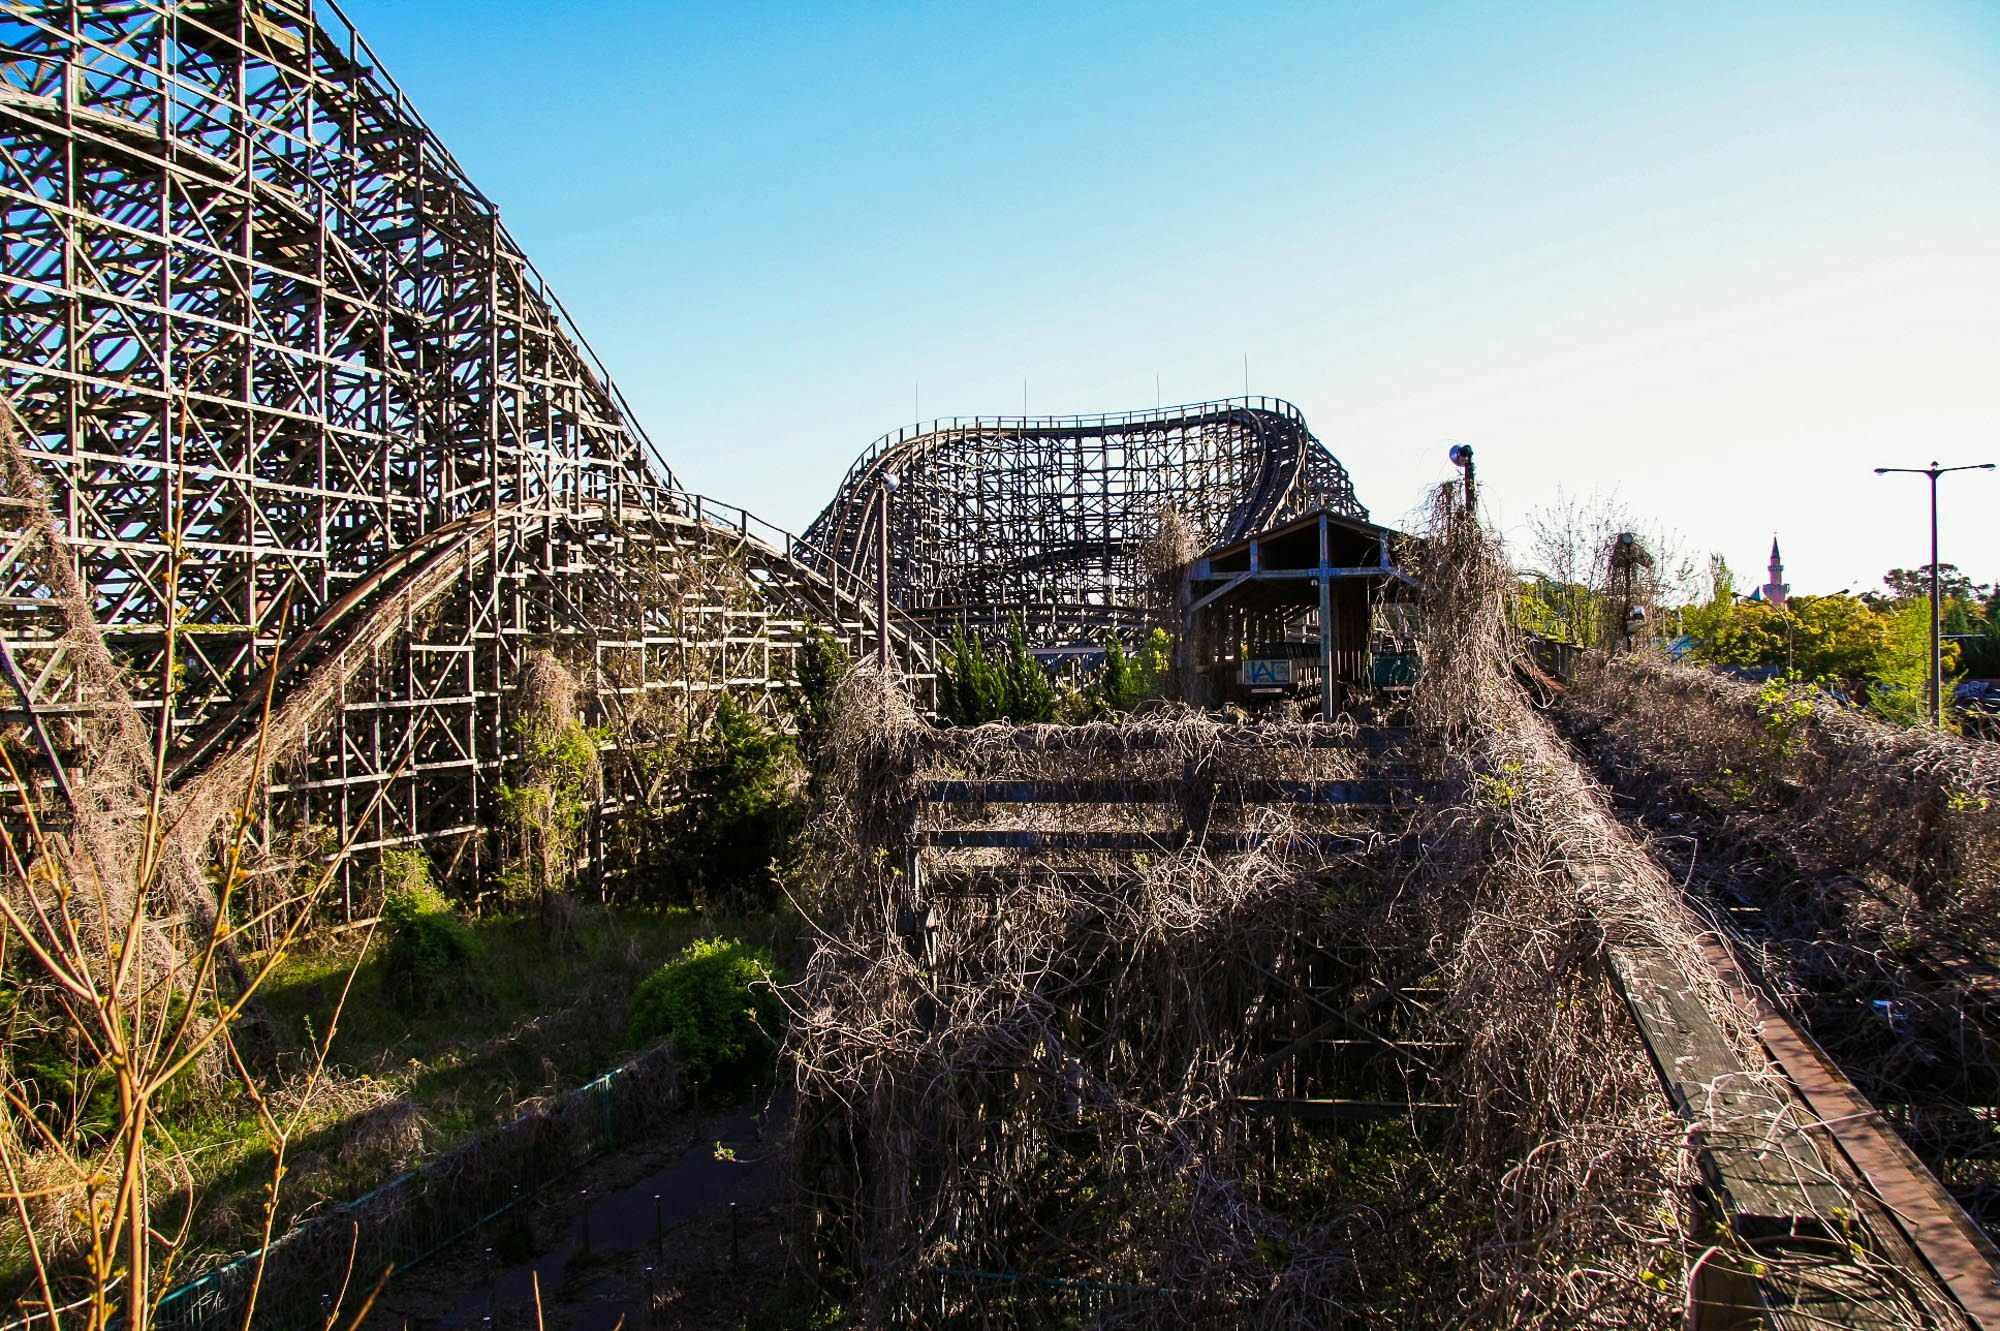 Overgrowth on a roller coaster ride at Nara Dreamland